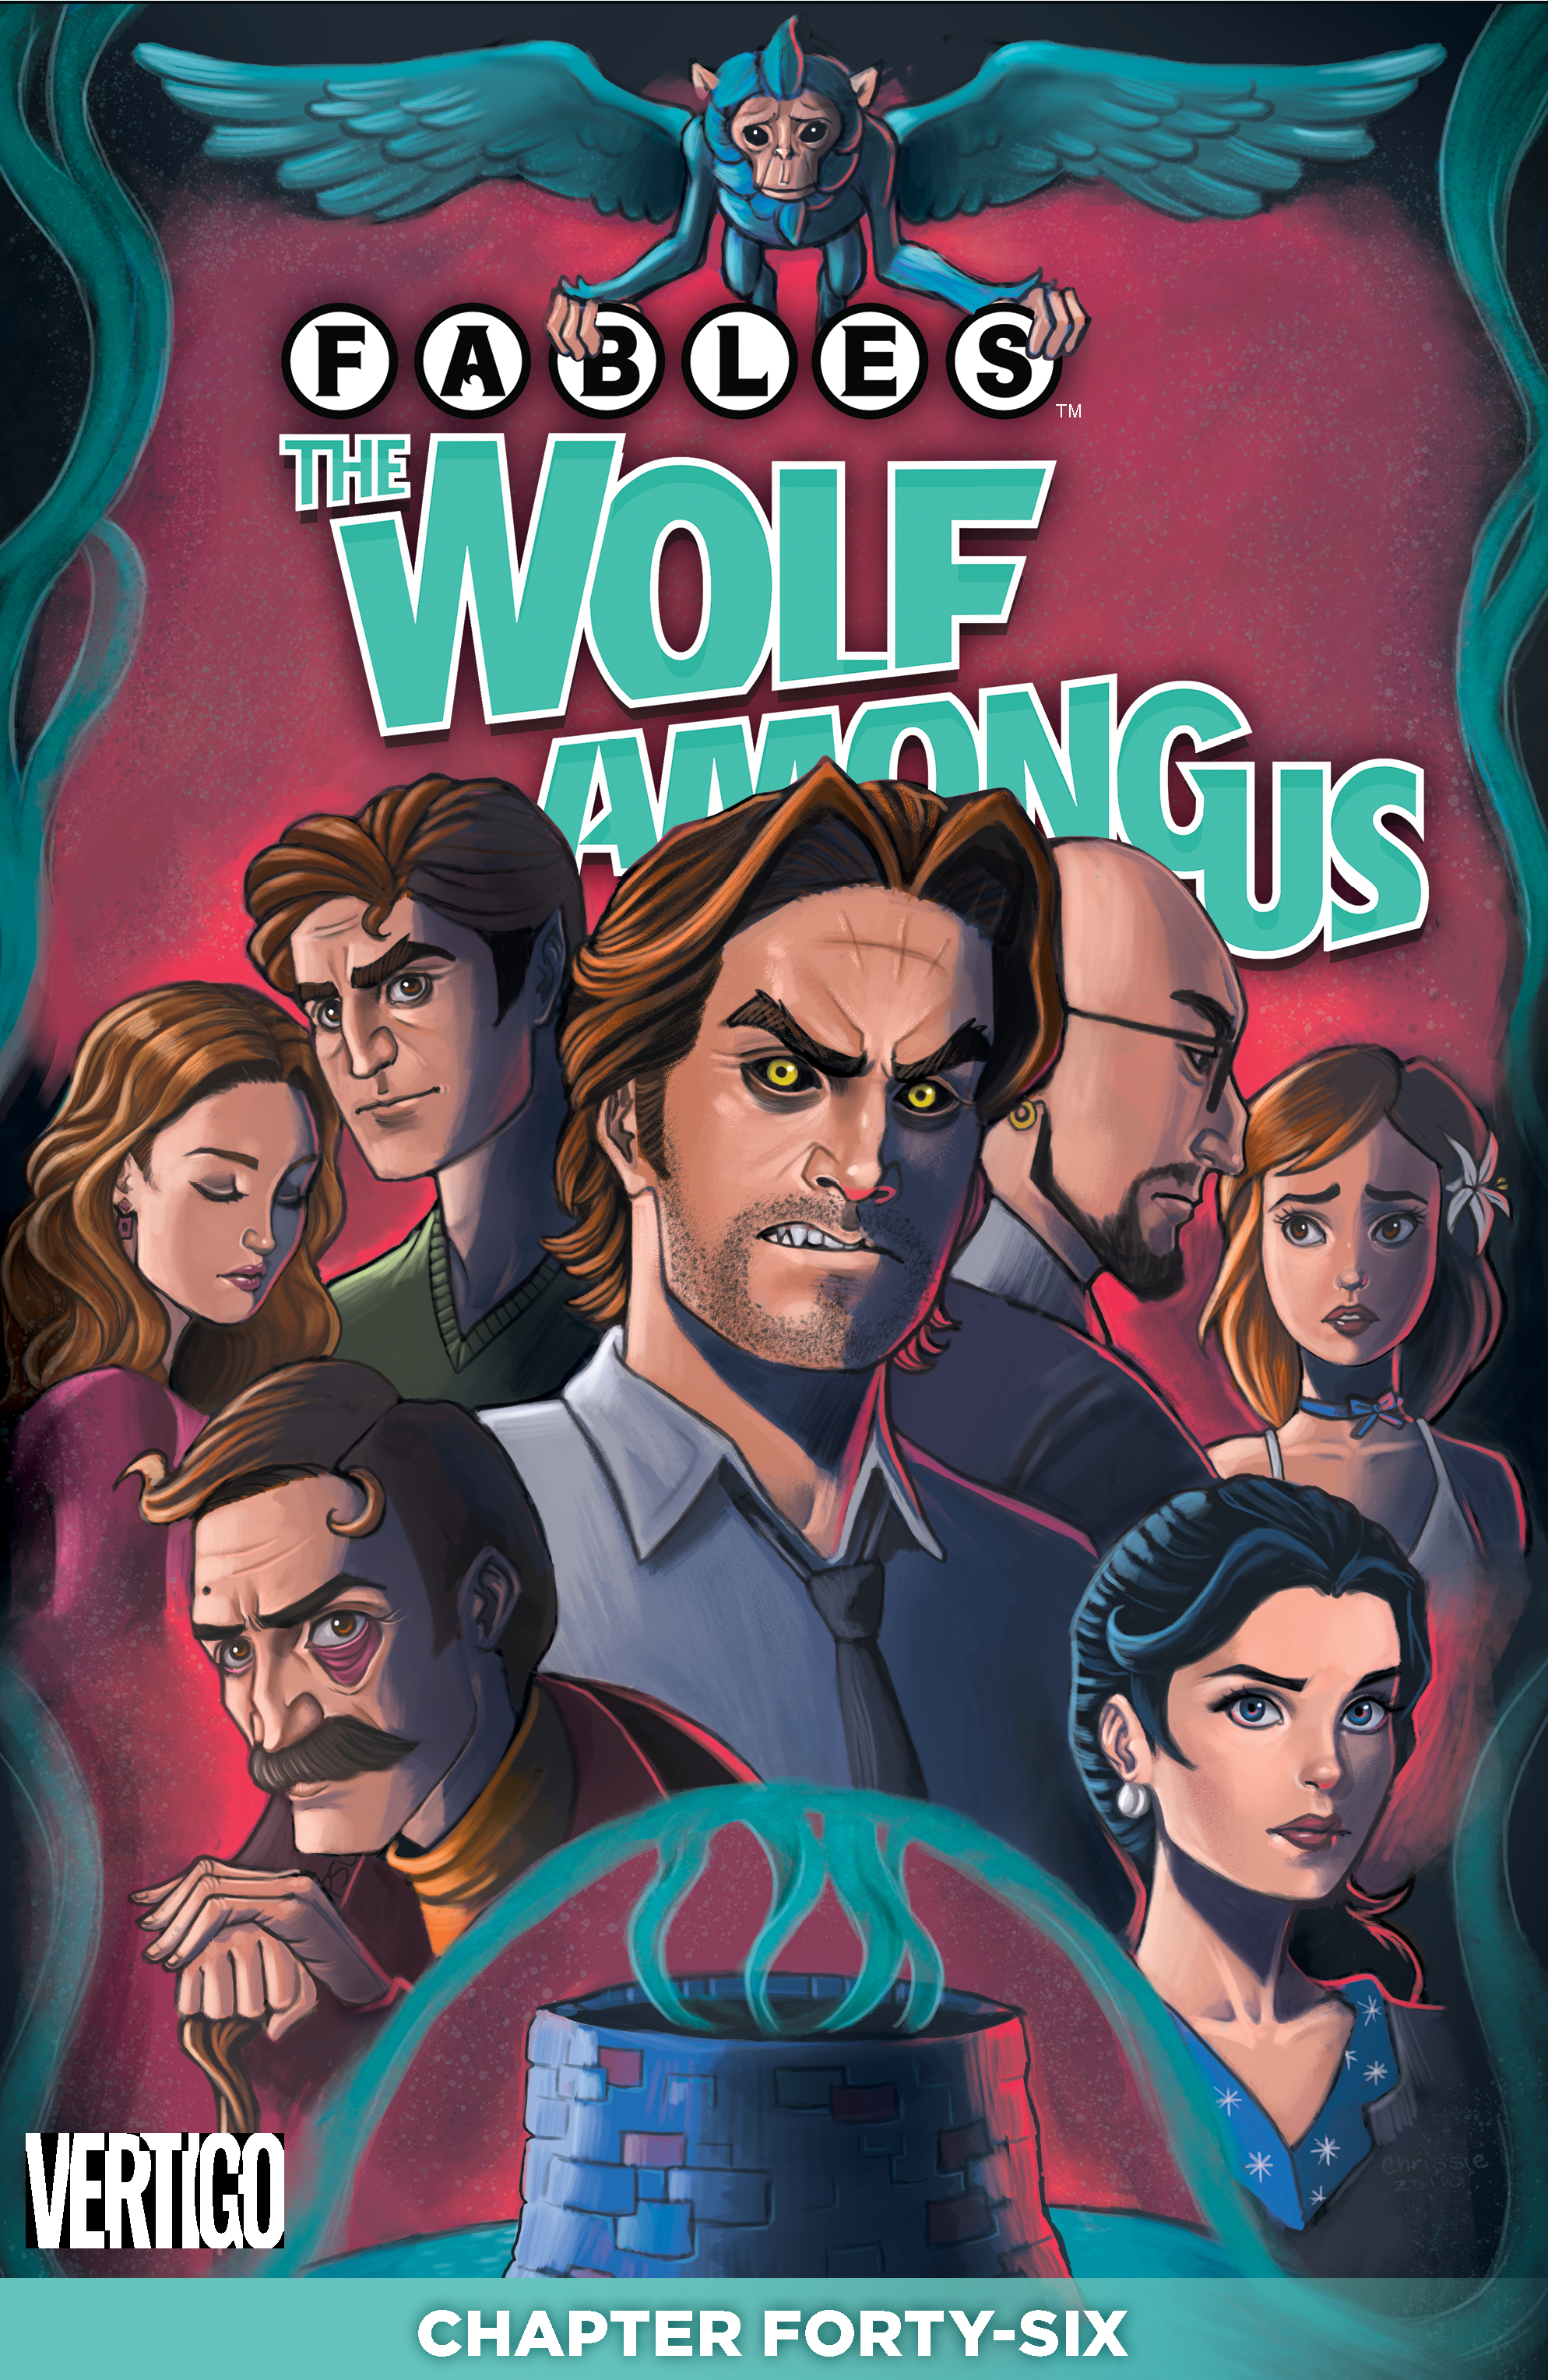 Fables: The Wolf Among Us #46 preview images